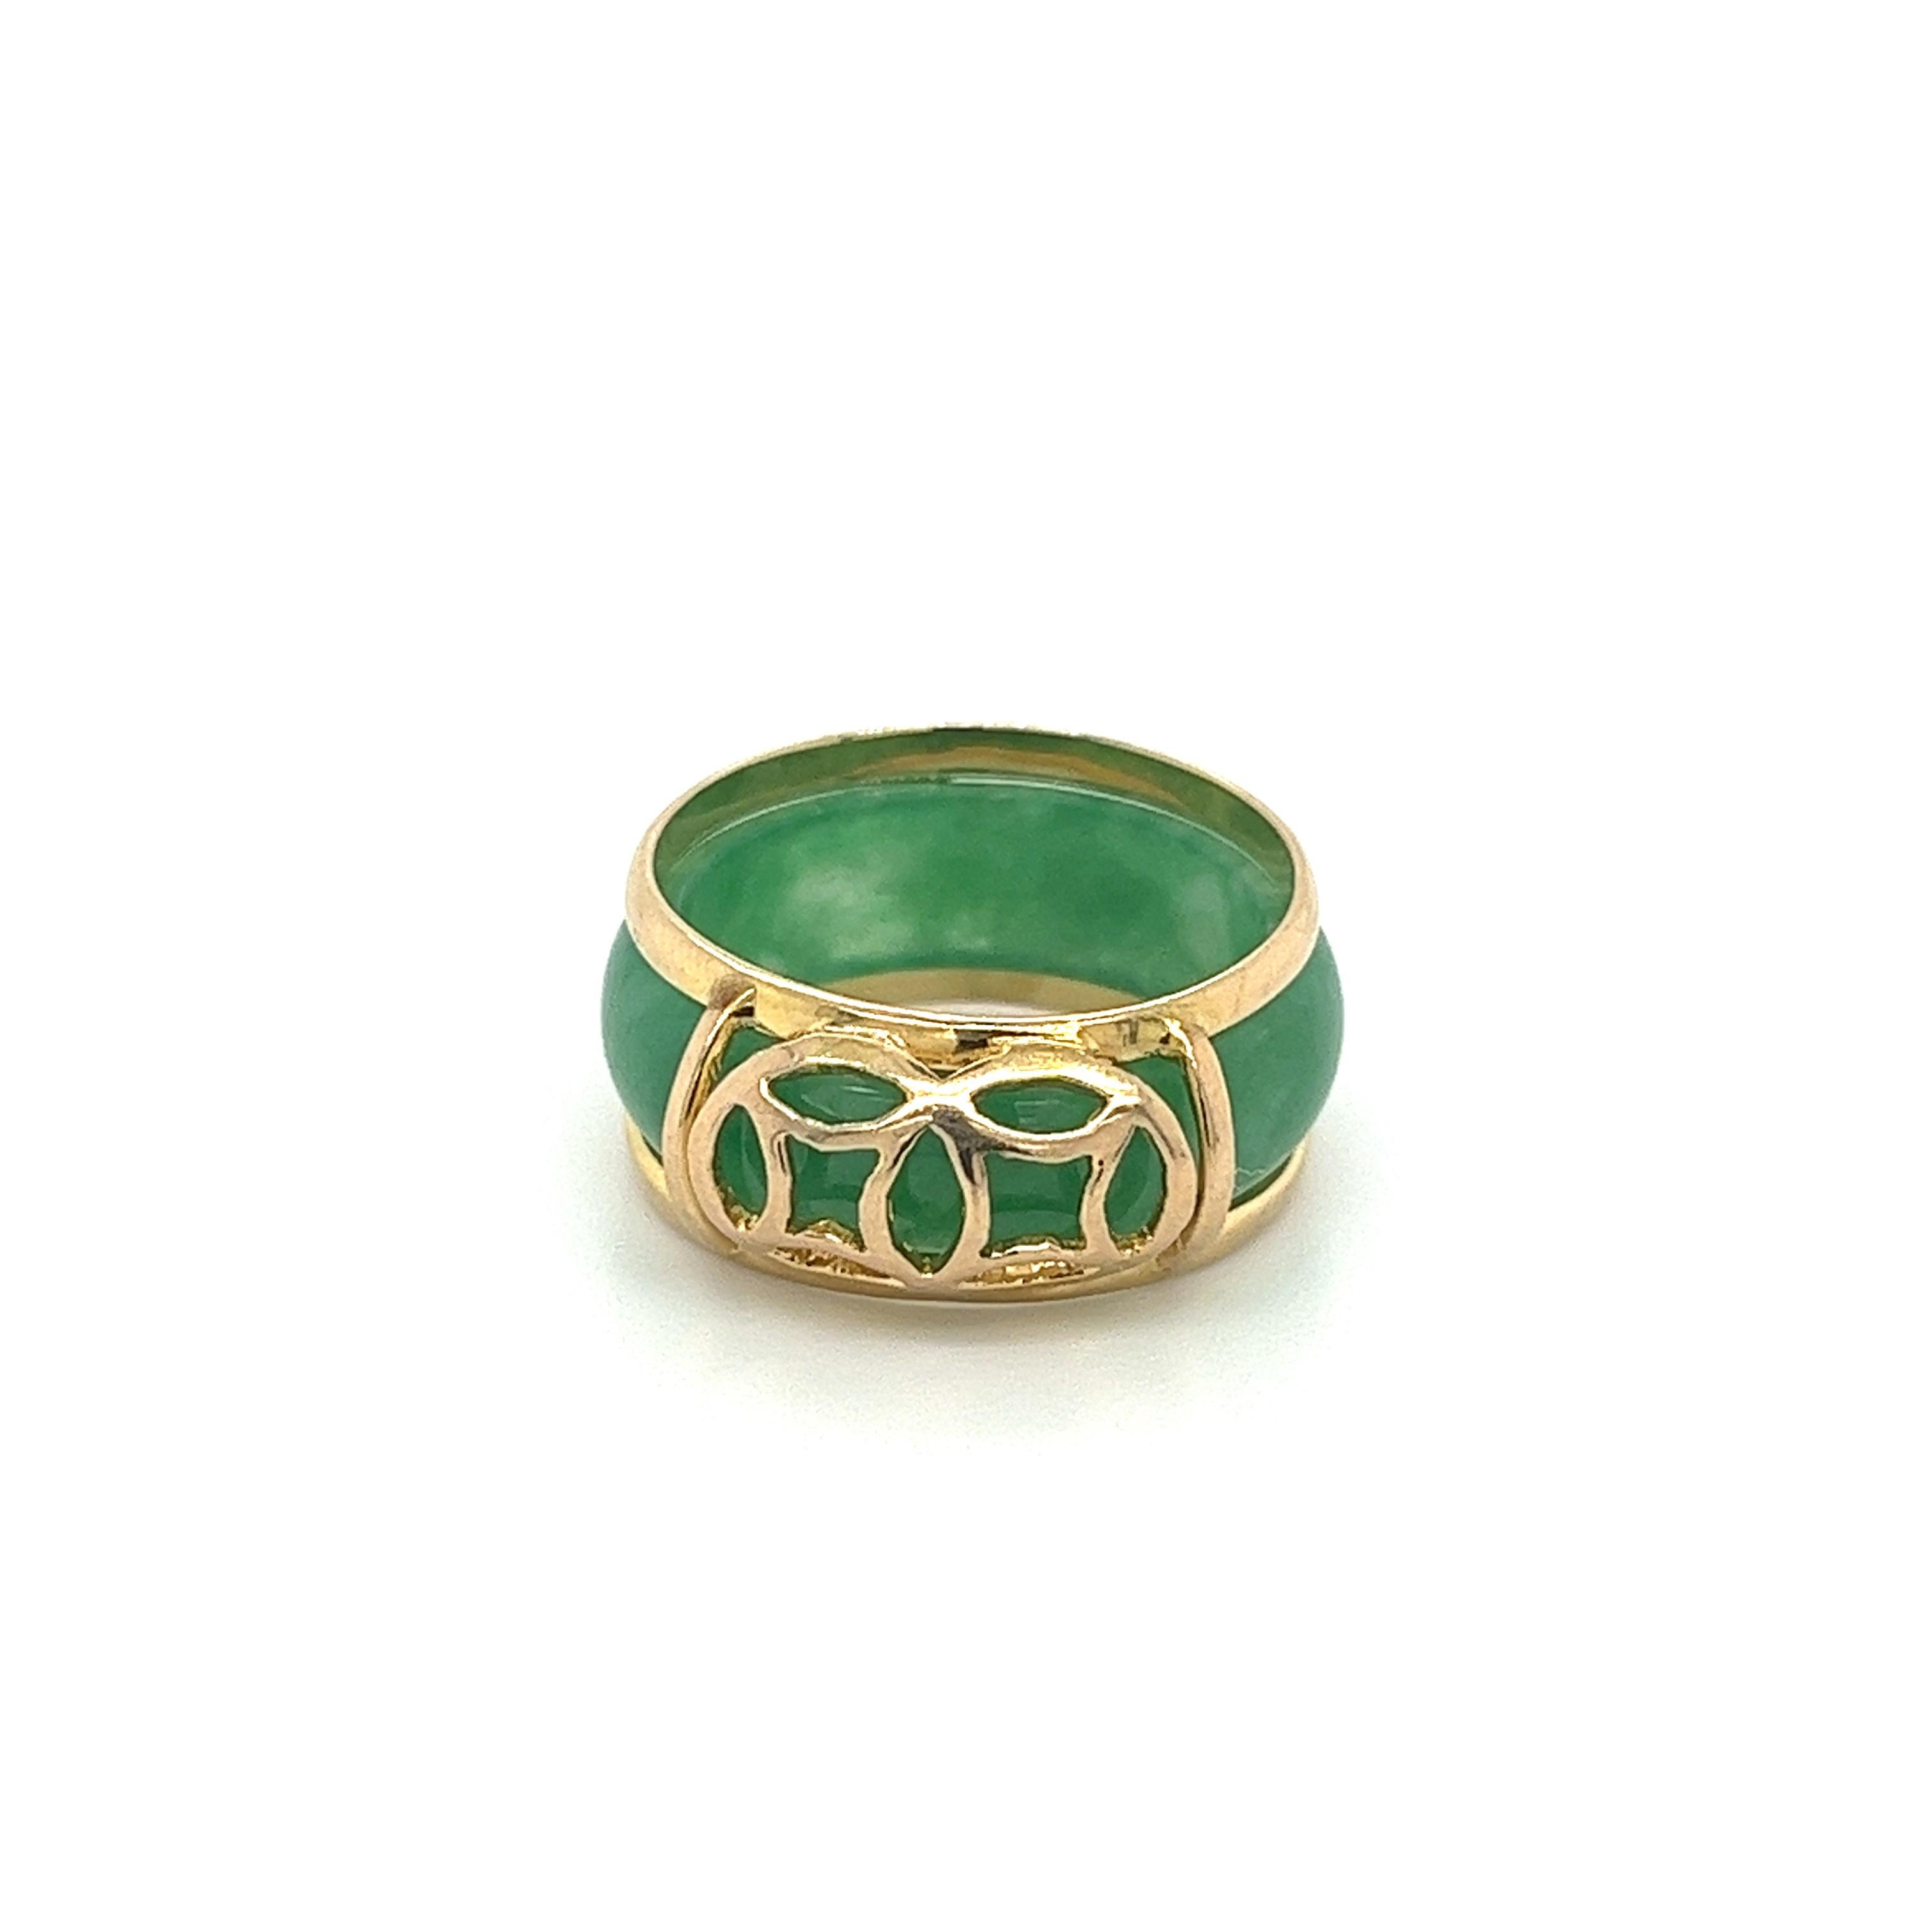 Vintage 14k yellow gold and Jadeite Jade 9mm band pinky ring. This ring features a cabochon cut Jade that freely connects and detaches from a 14k solid yellow gold frame. A unique and flexible piece that's certain to turn heads. 

Details: 
- Metal: